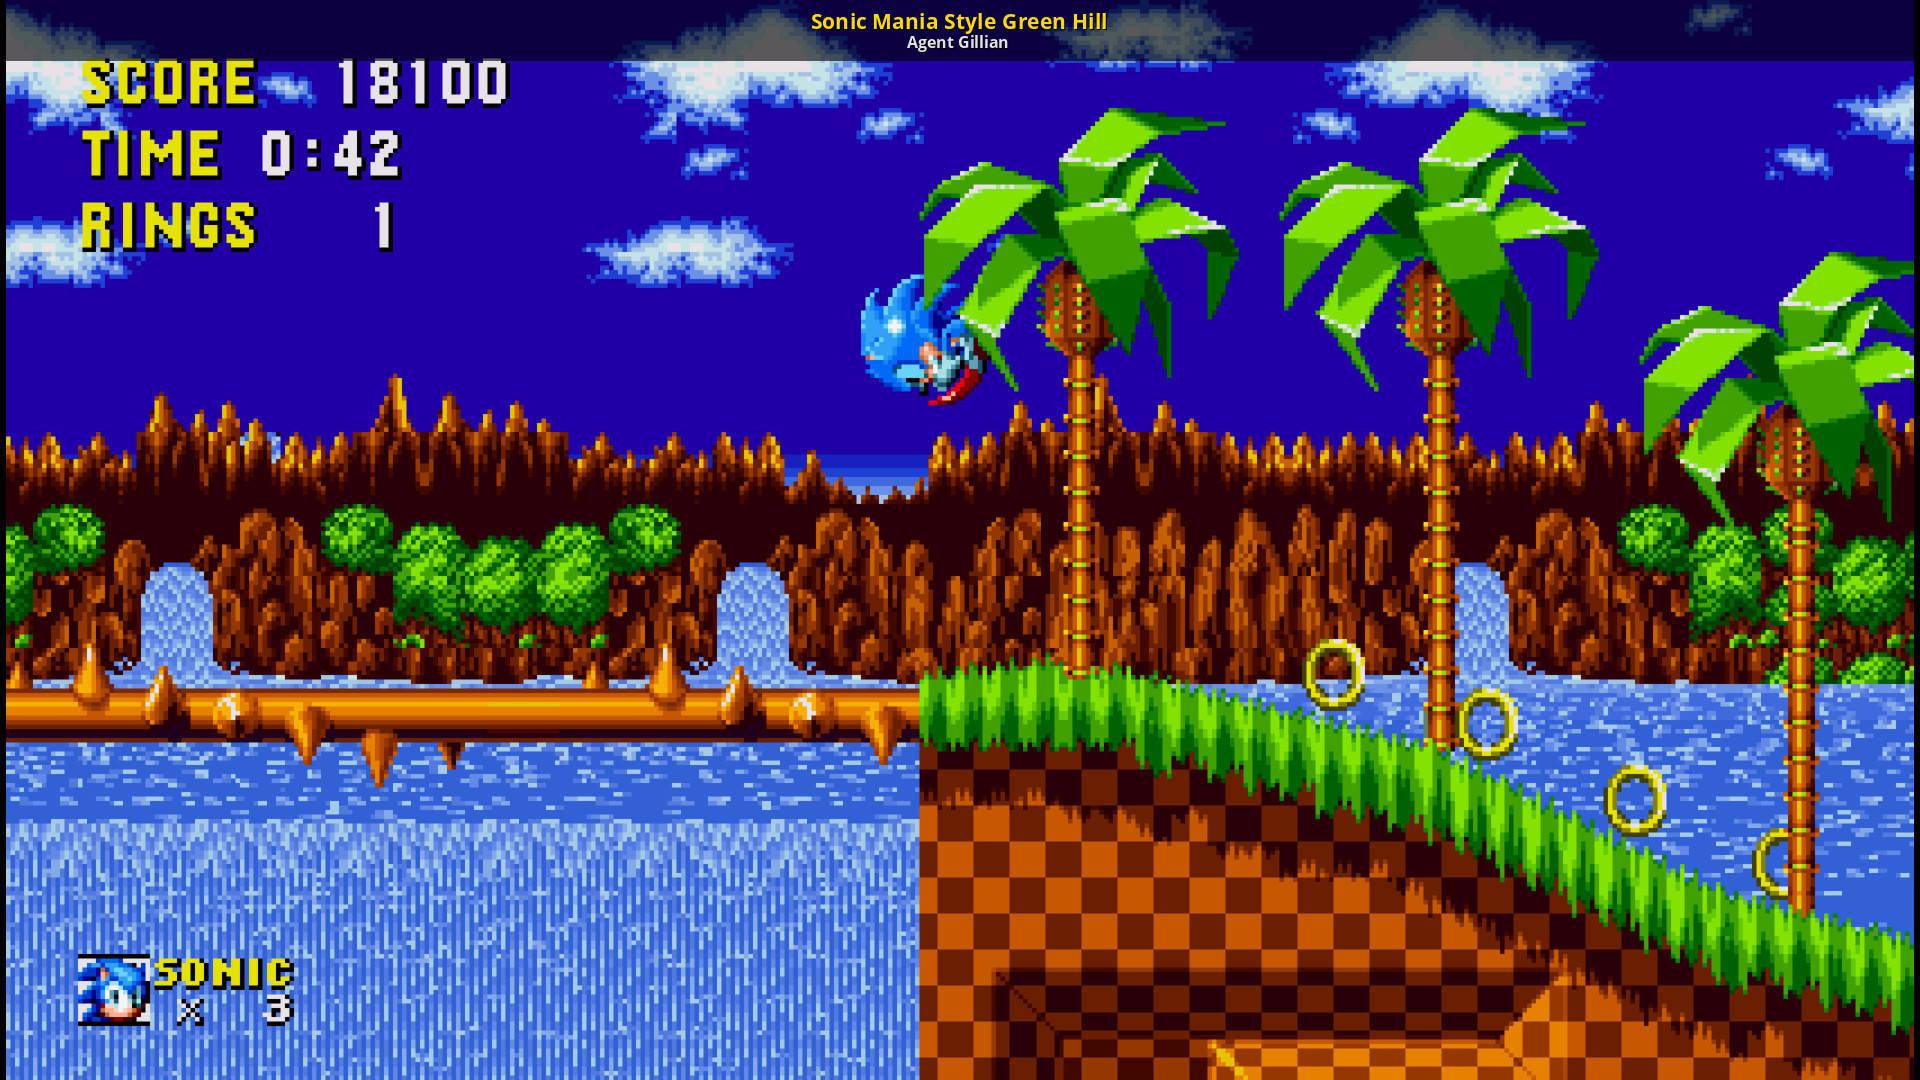 Green Hill Zone - Sonic's Favourite Place Wallpaper